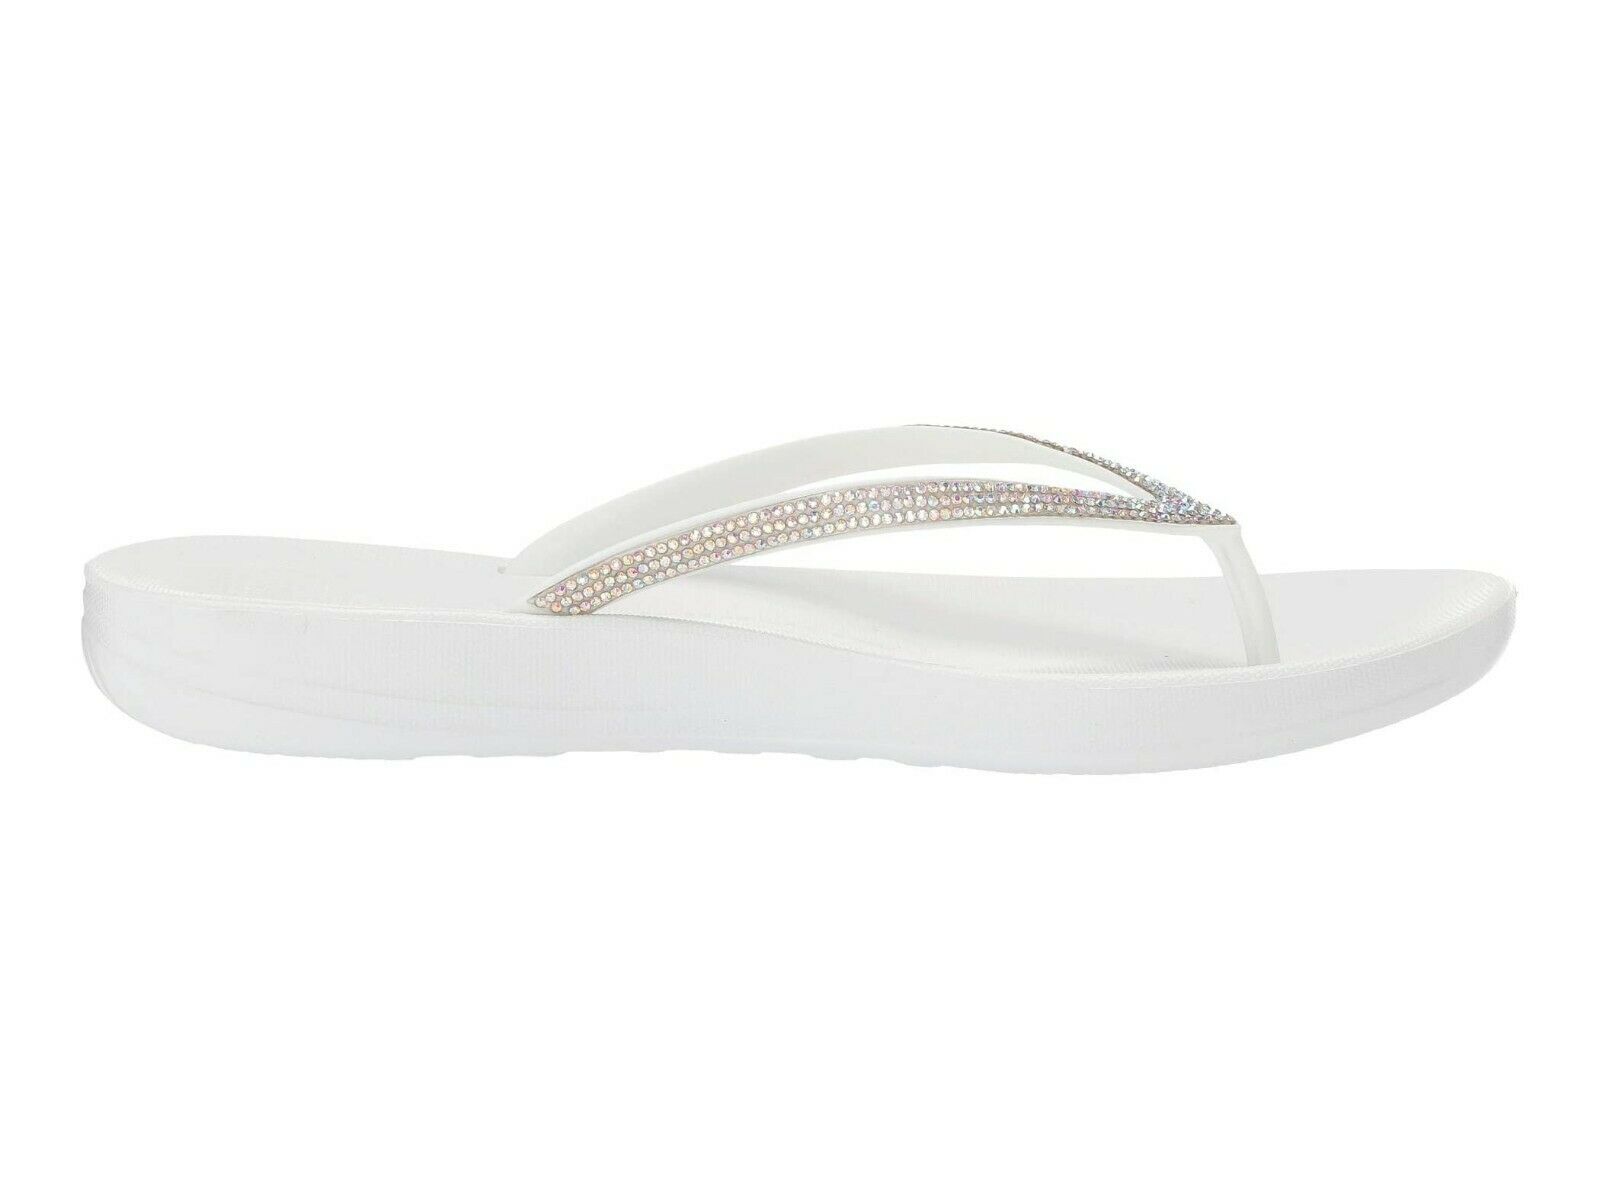 FitFlop iQUSHION SPARKLE Women Toe Post Sandal Thong Beach Flip Flops Shoes - Valley Sports UK